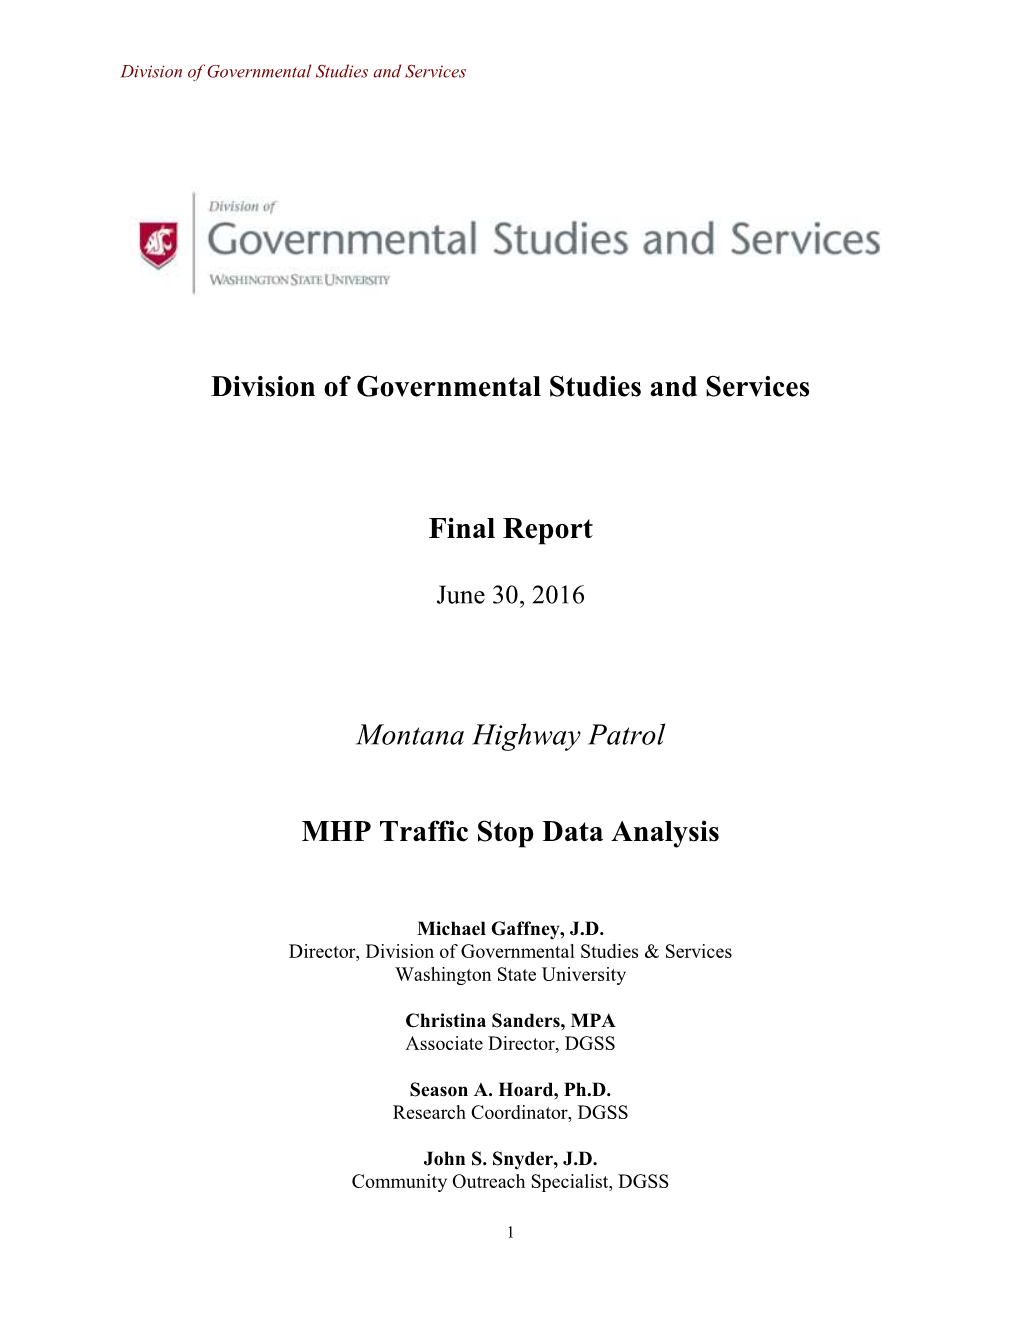 Division of Governmental Studies and Services Final Report Montana